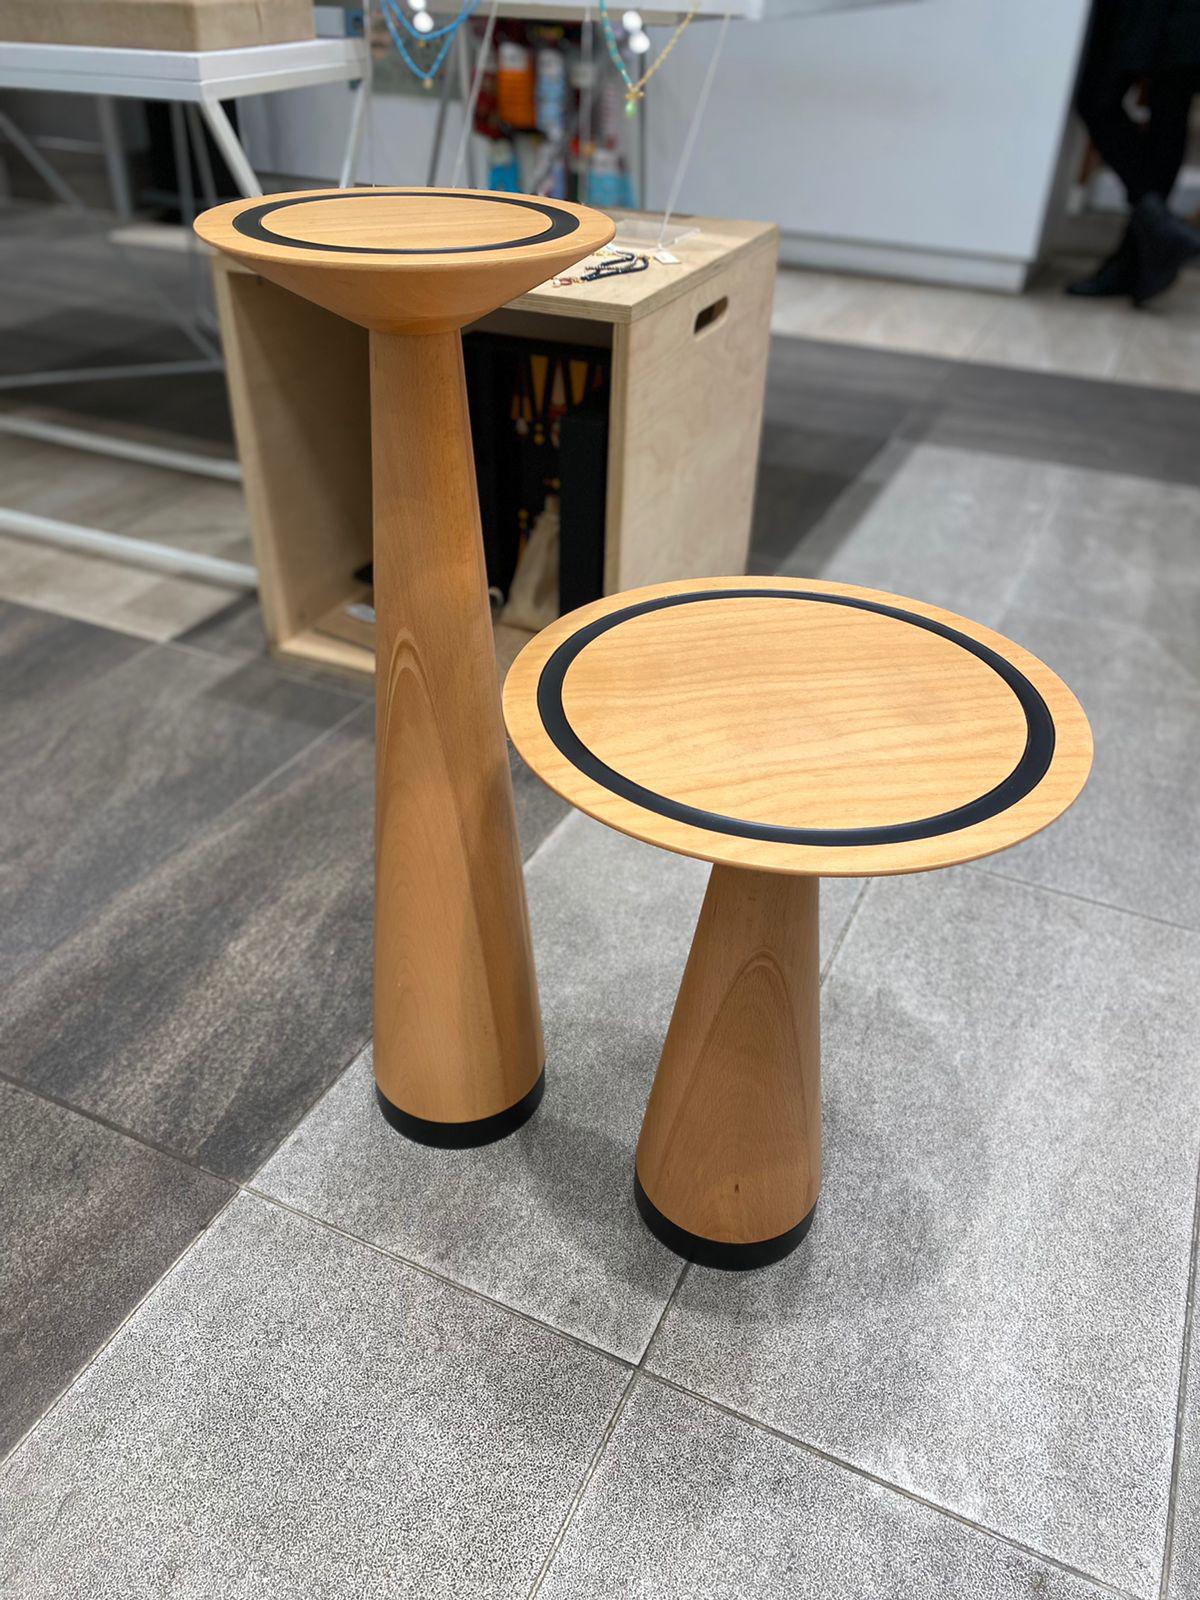 The Set Is Made of 2 units made out of beech wood with black powder coated metal finish. The dimensions of the tables are studied in proportion of size and harmony of material to give the piece an artistic identity that surpasses time and space. The